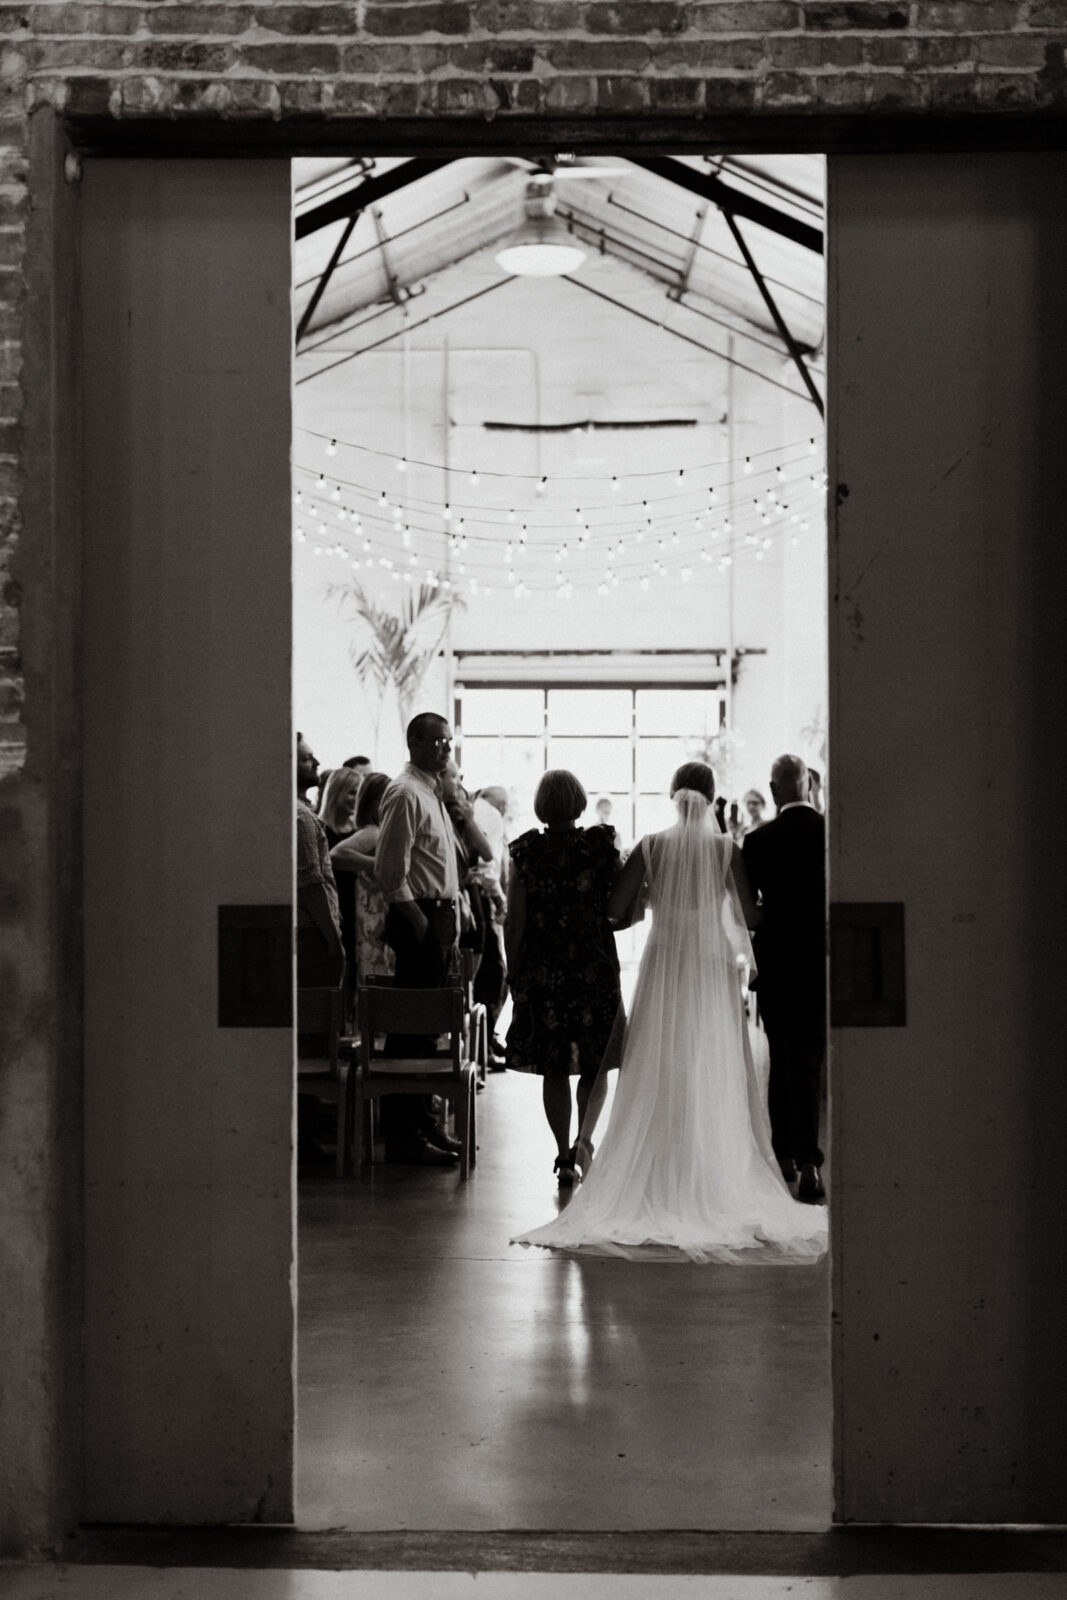 Simple and modern spring wedding day ceremony at PIAKKA, St. Paul, Minnesota.